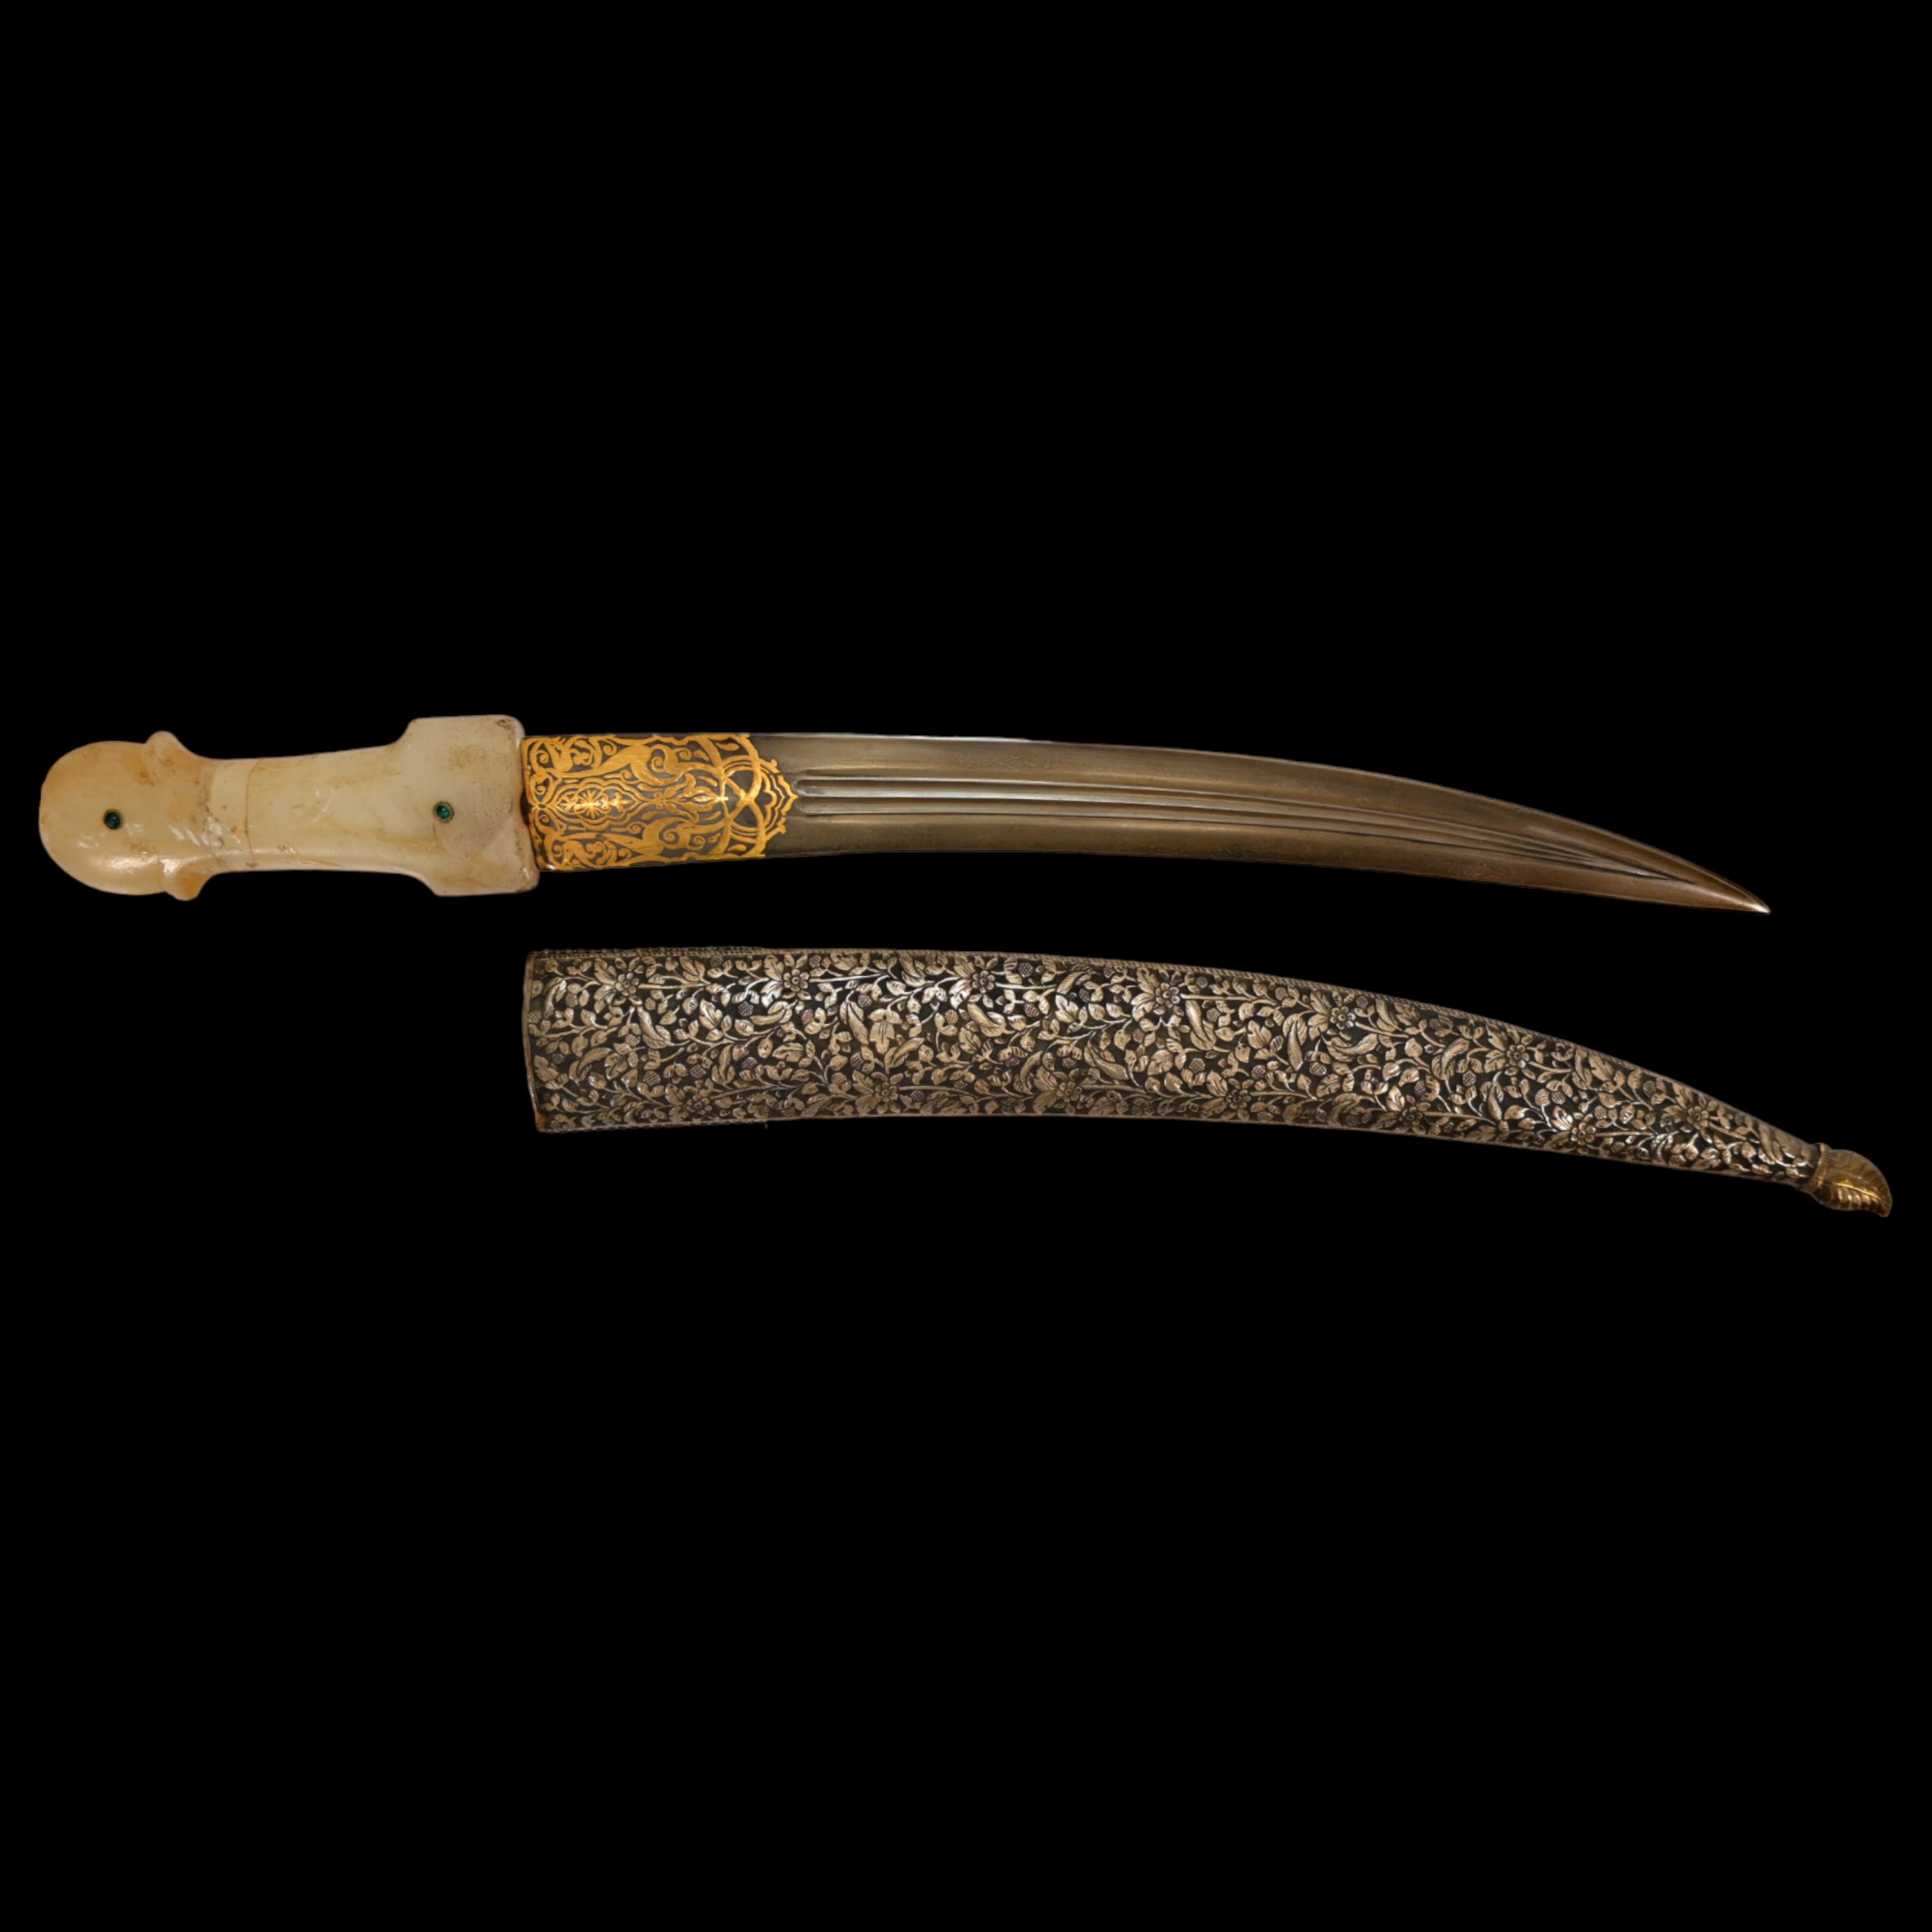 Very rare Dagger with jade handle, Wootz blade, precious stones and gold, Ottoman Empire, 18th C. - Image 10 of 19